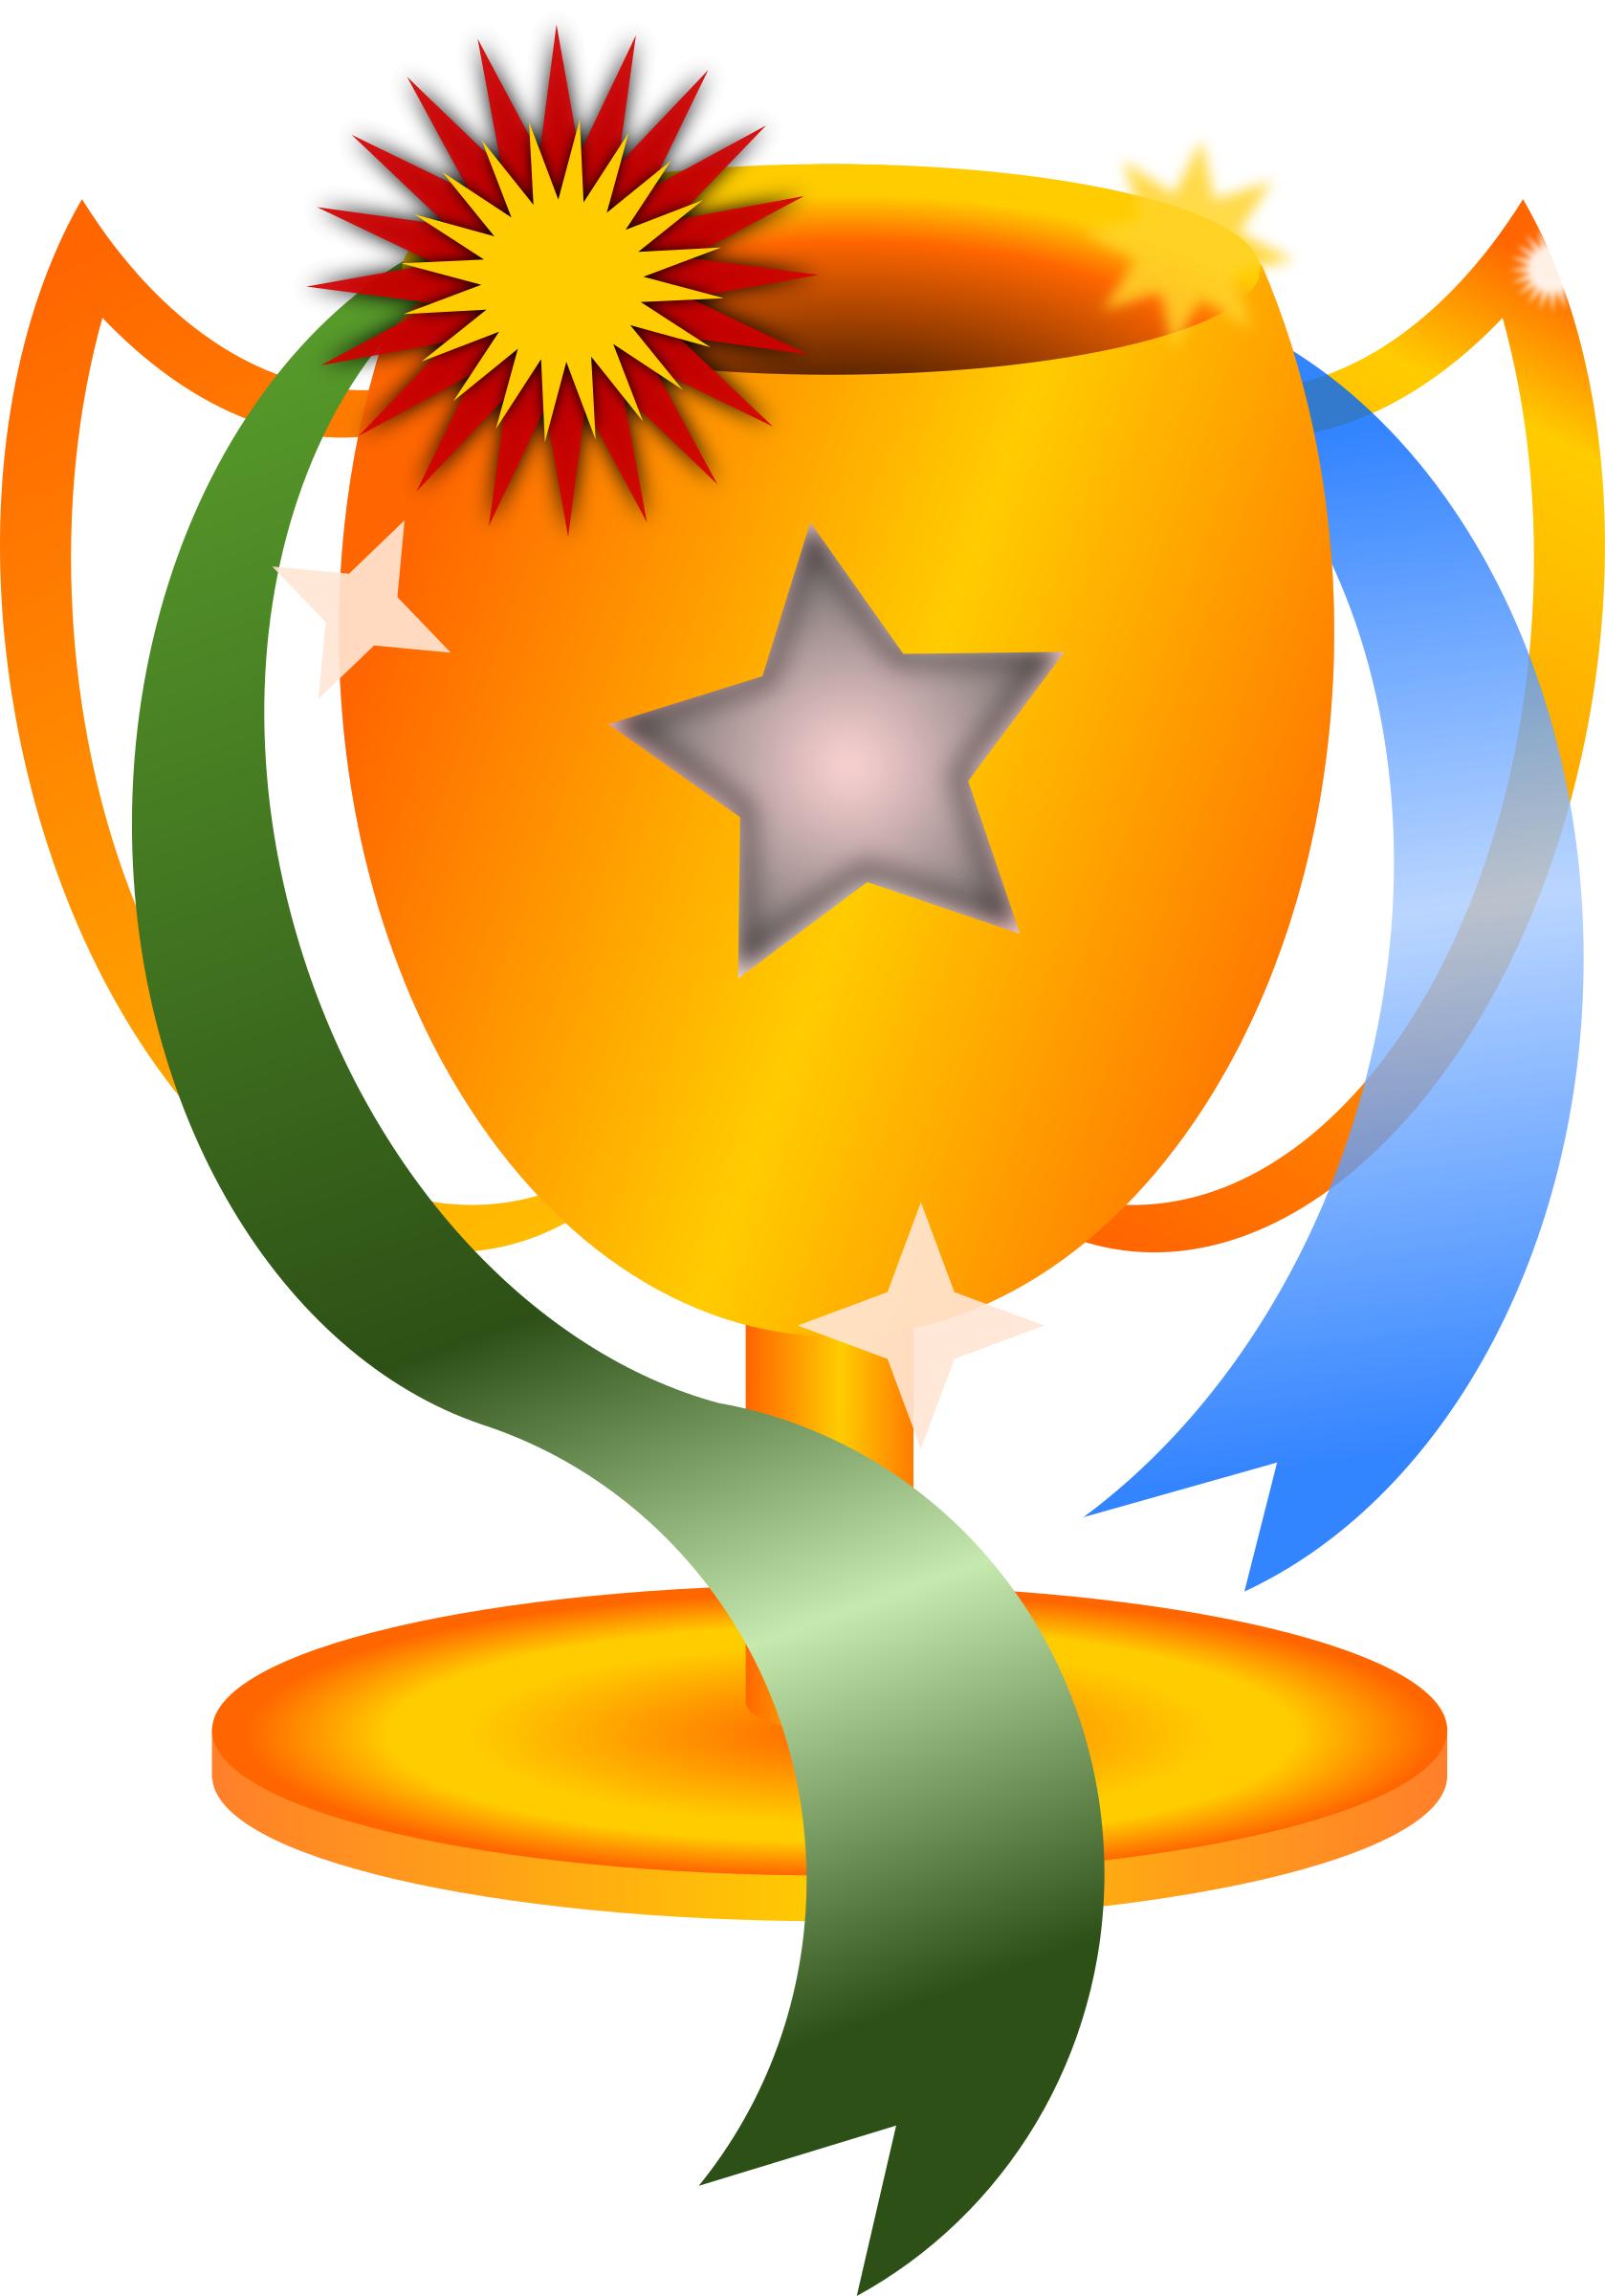 trophy PNG icons